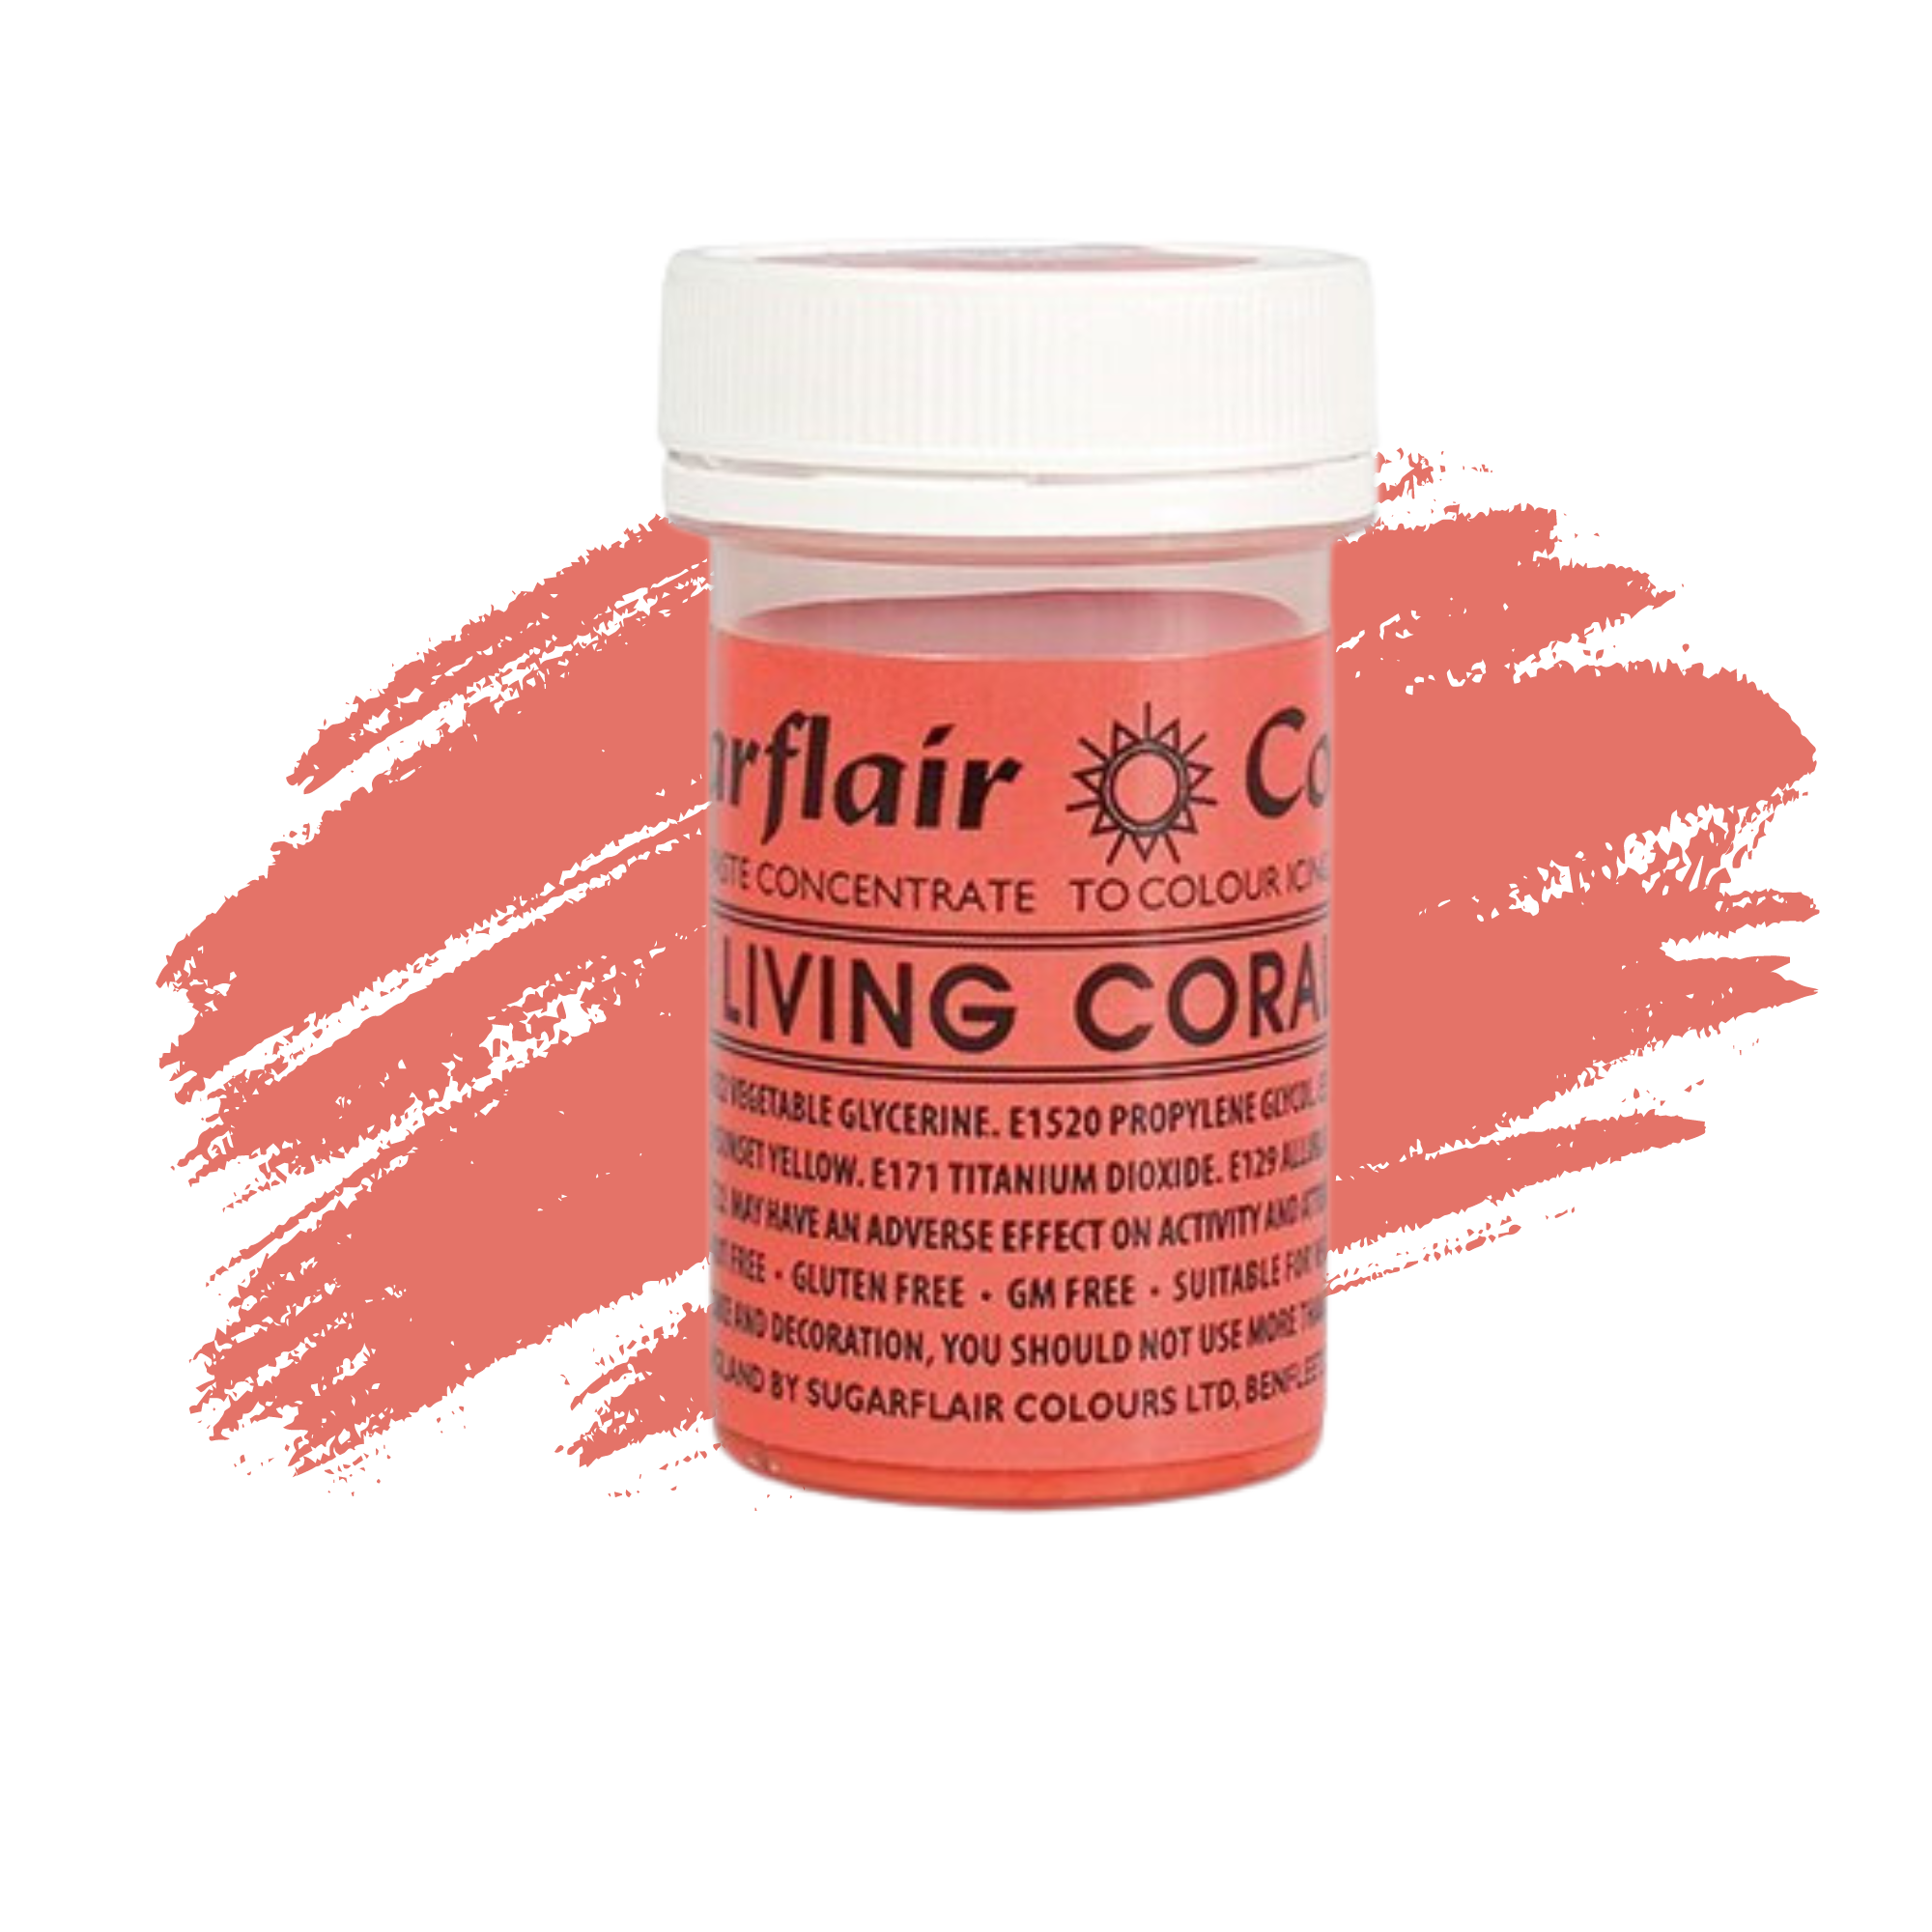 Sugarflair Paste Colours Concentrated Food Colouring - Spectral Living Coral - 25g